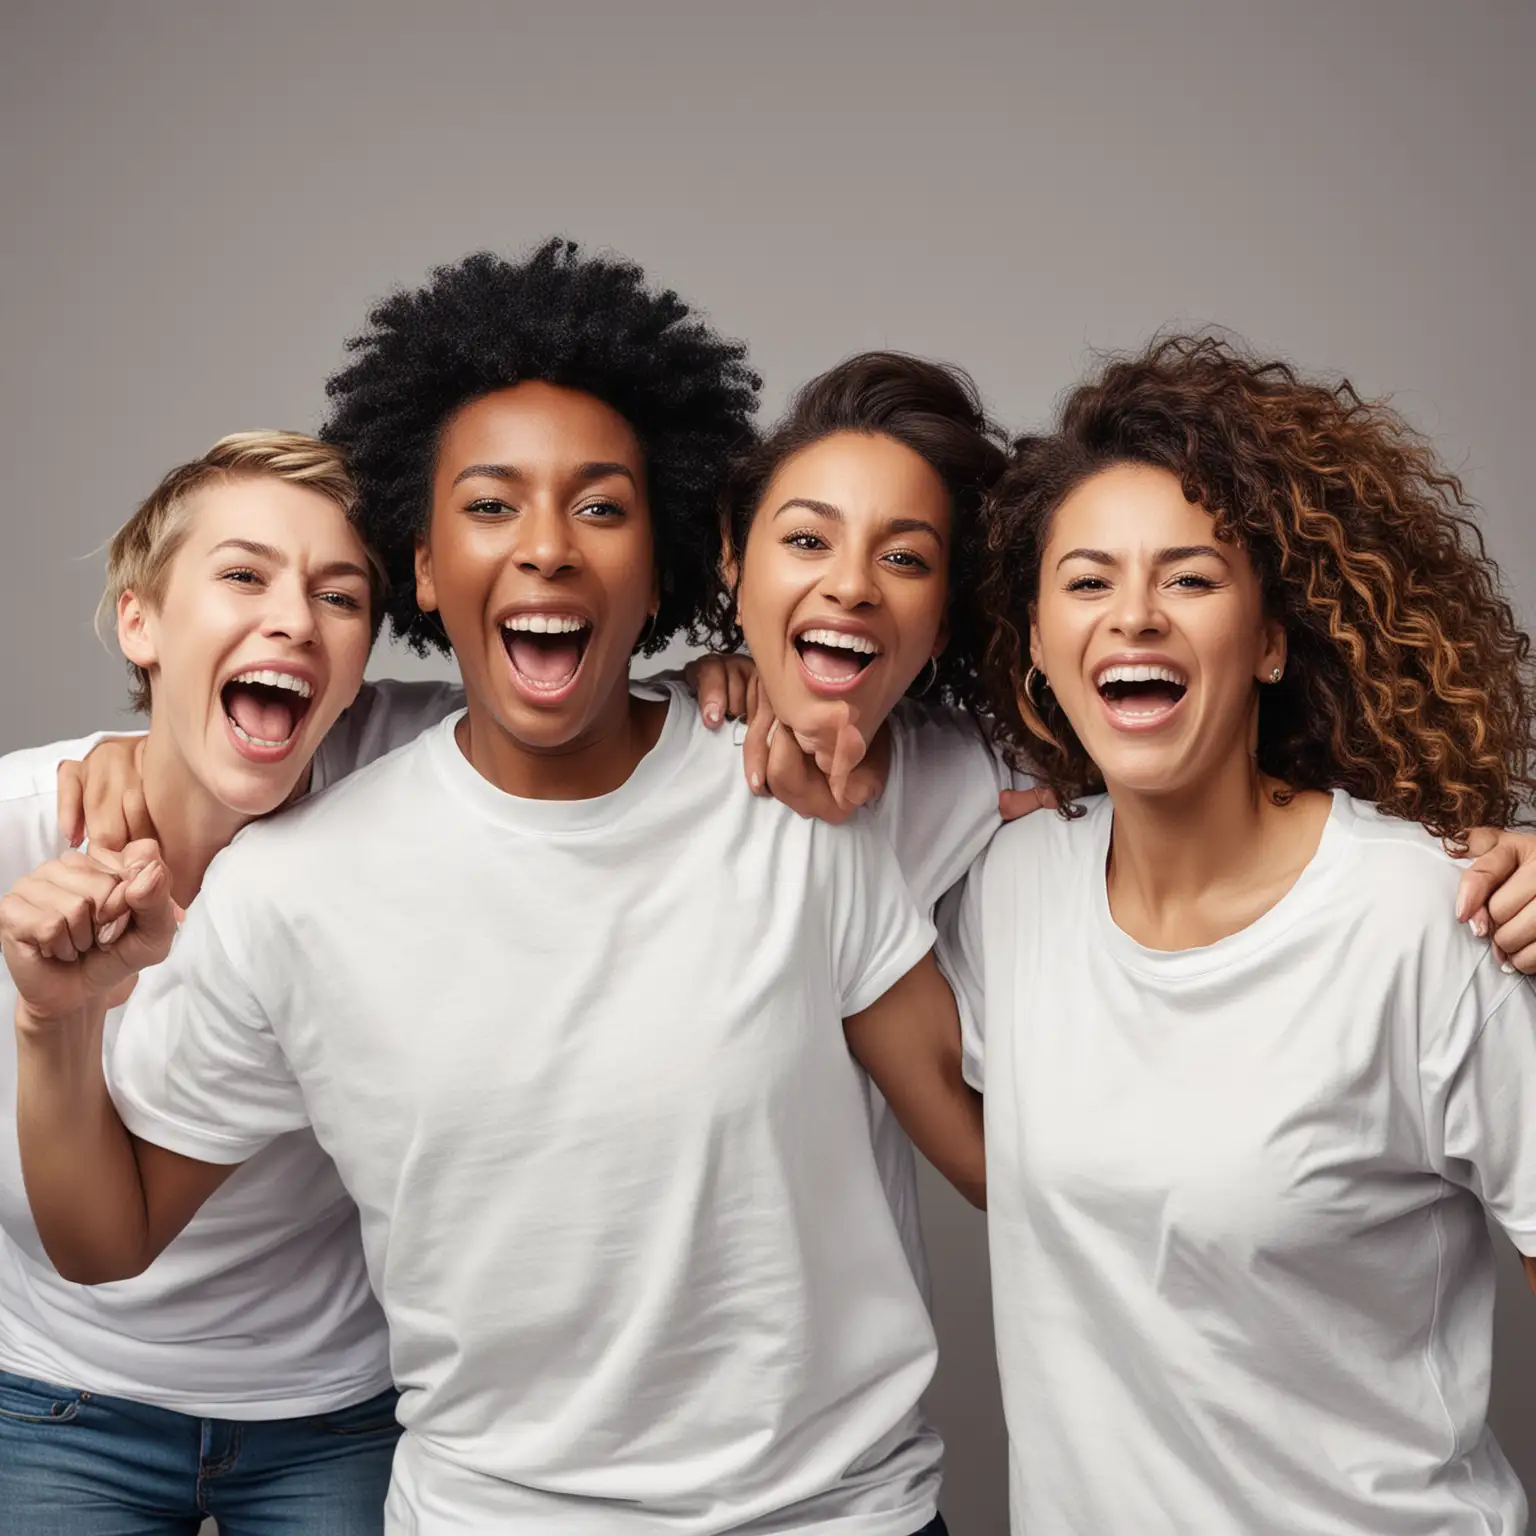 Group of black and white Adult friends excited wearing plain t shirts